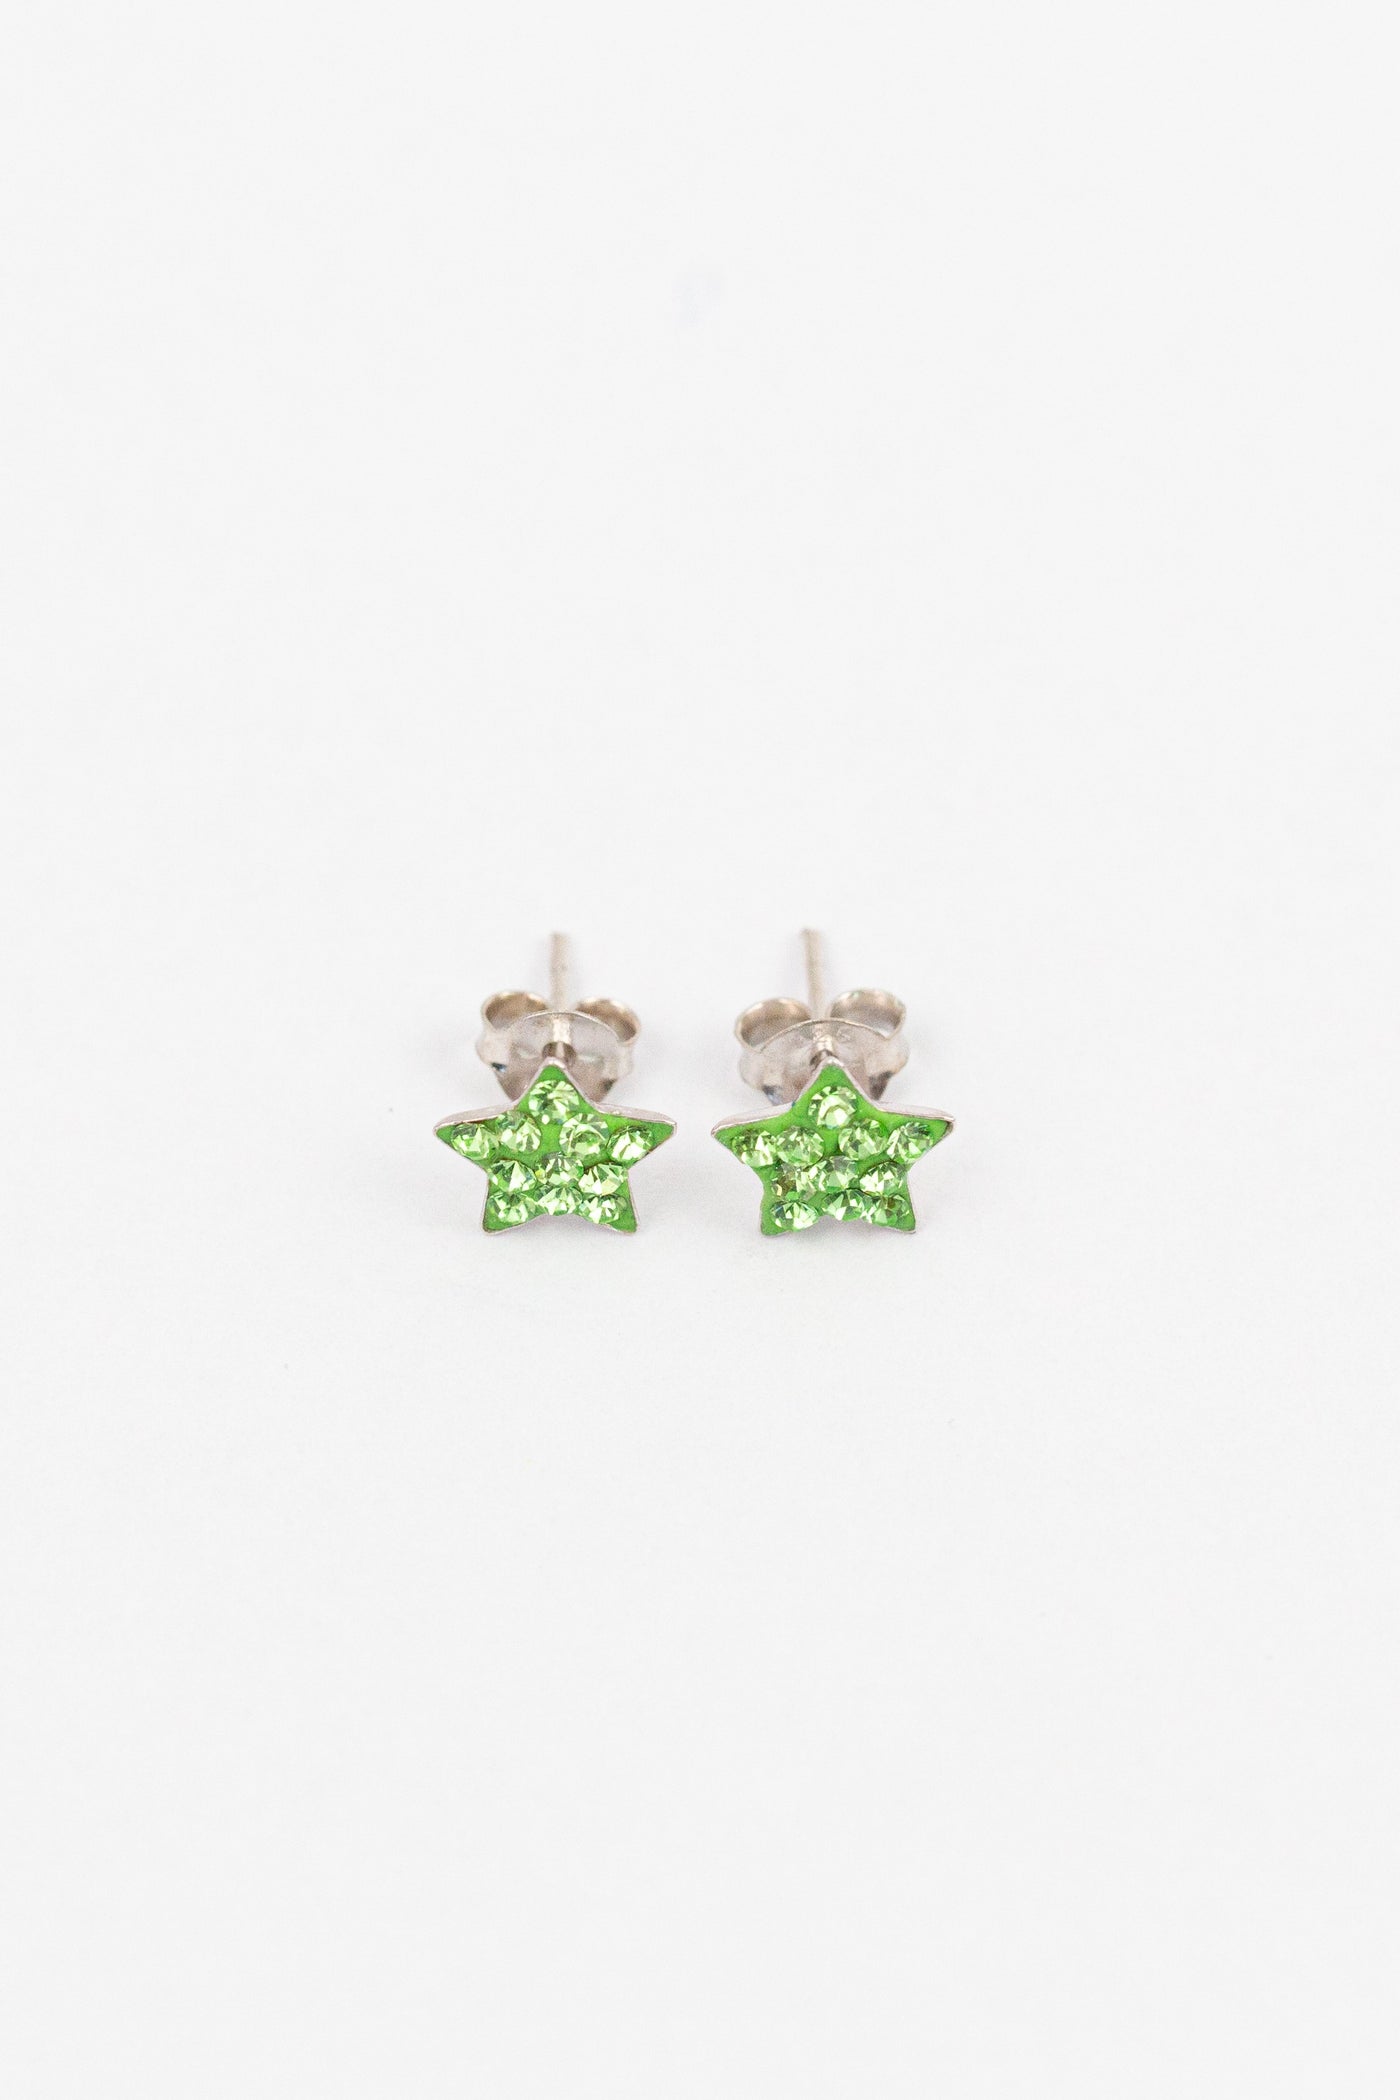 Crystal Star Pave Stud Silver Earrings in Peridot | Annie and Sisters| sister stud earrings, for kids, children's jewelry, kids jewelry, best friend 